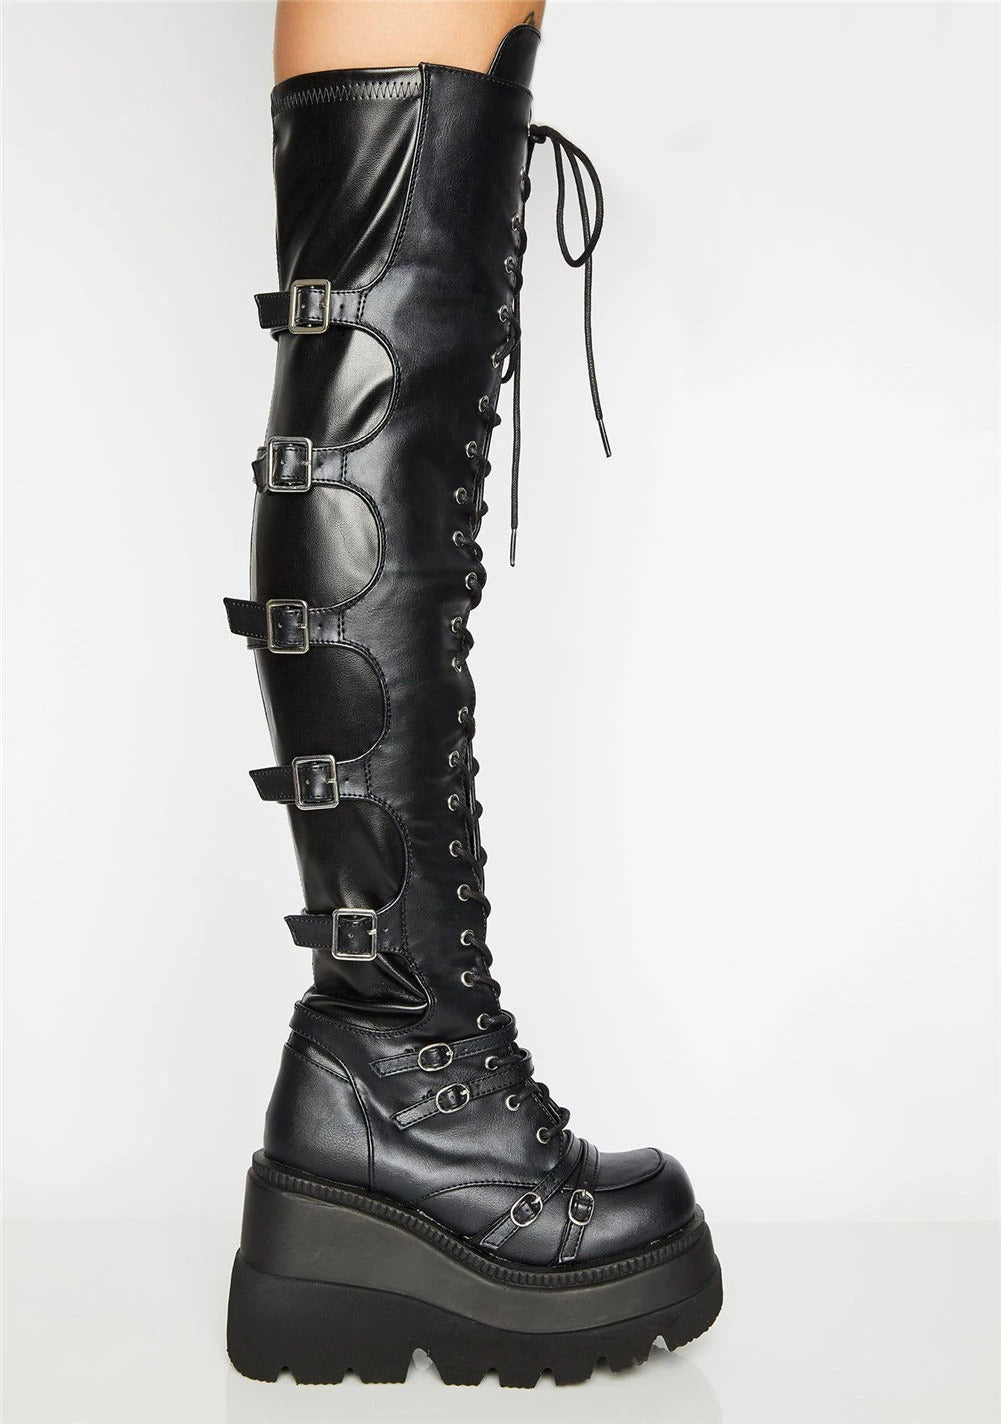 High Boots Buckle Straps